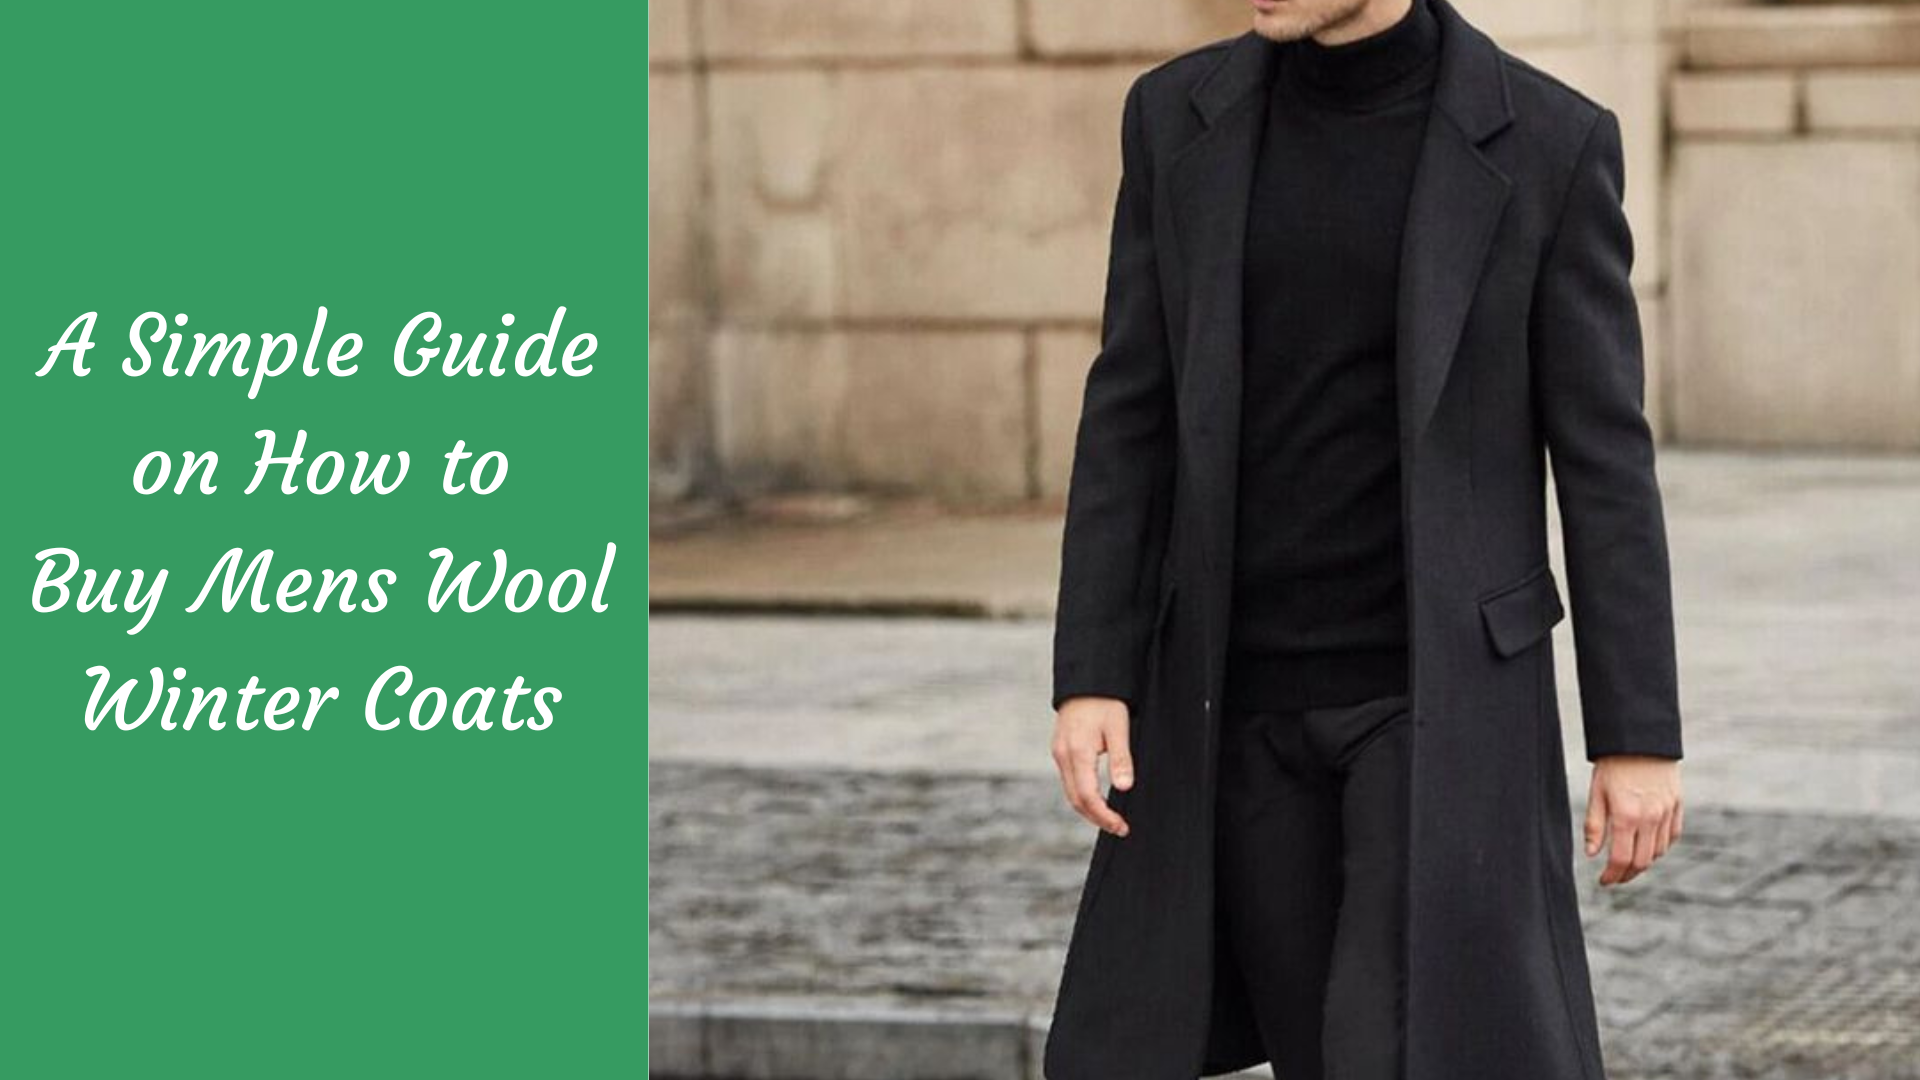 A Simple Guide on How to Buy Mens Wool Winter Coats - The Kosha